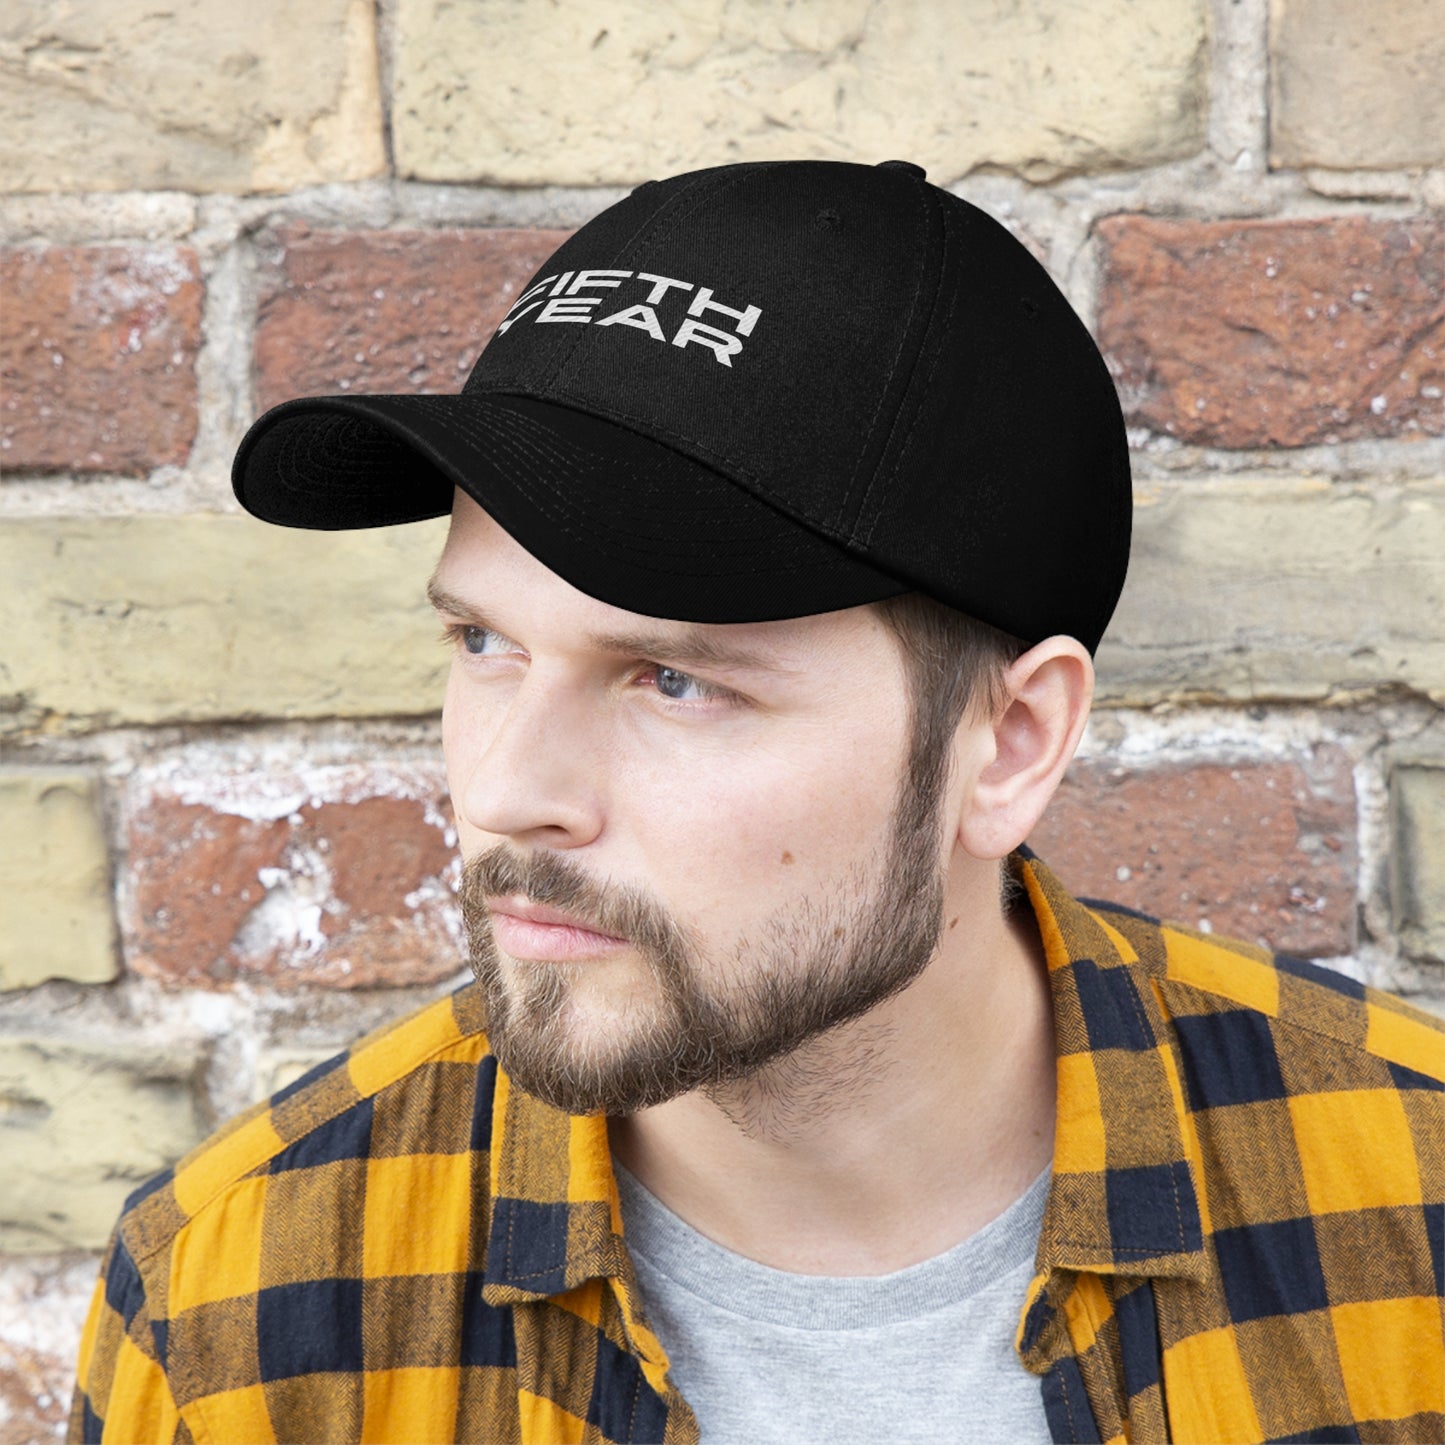 Fifth Year Embroidered Hat